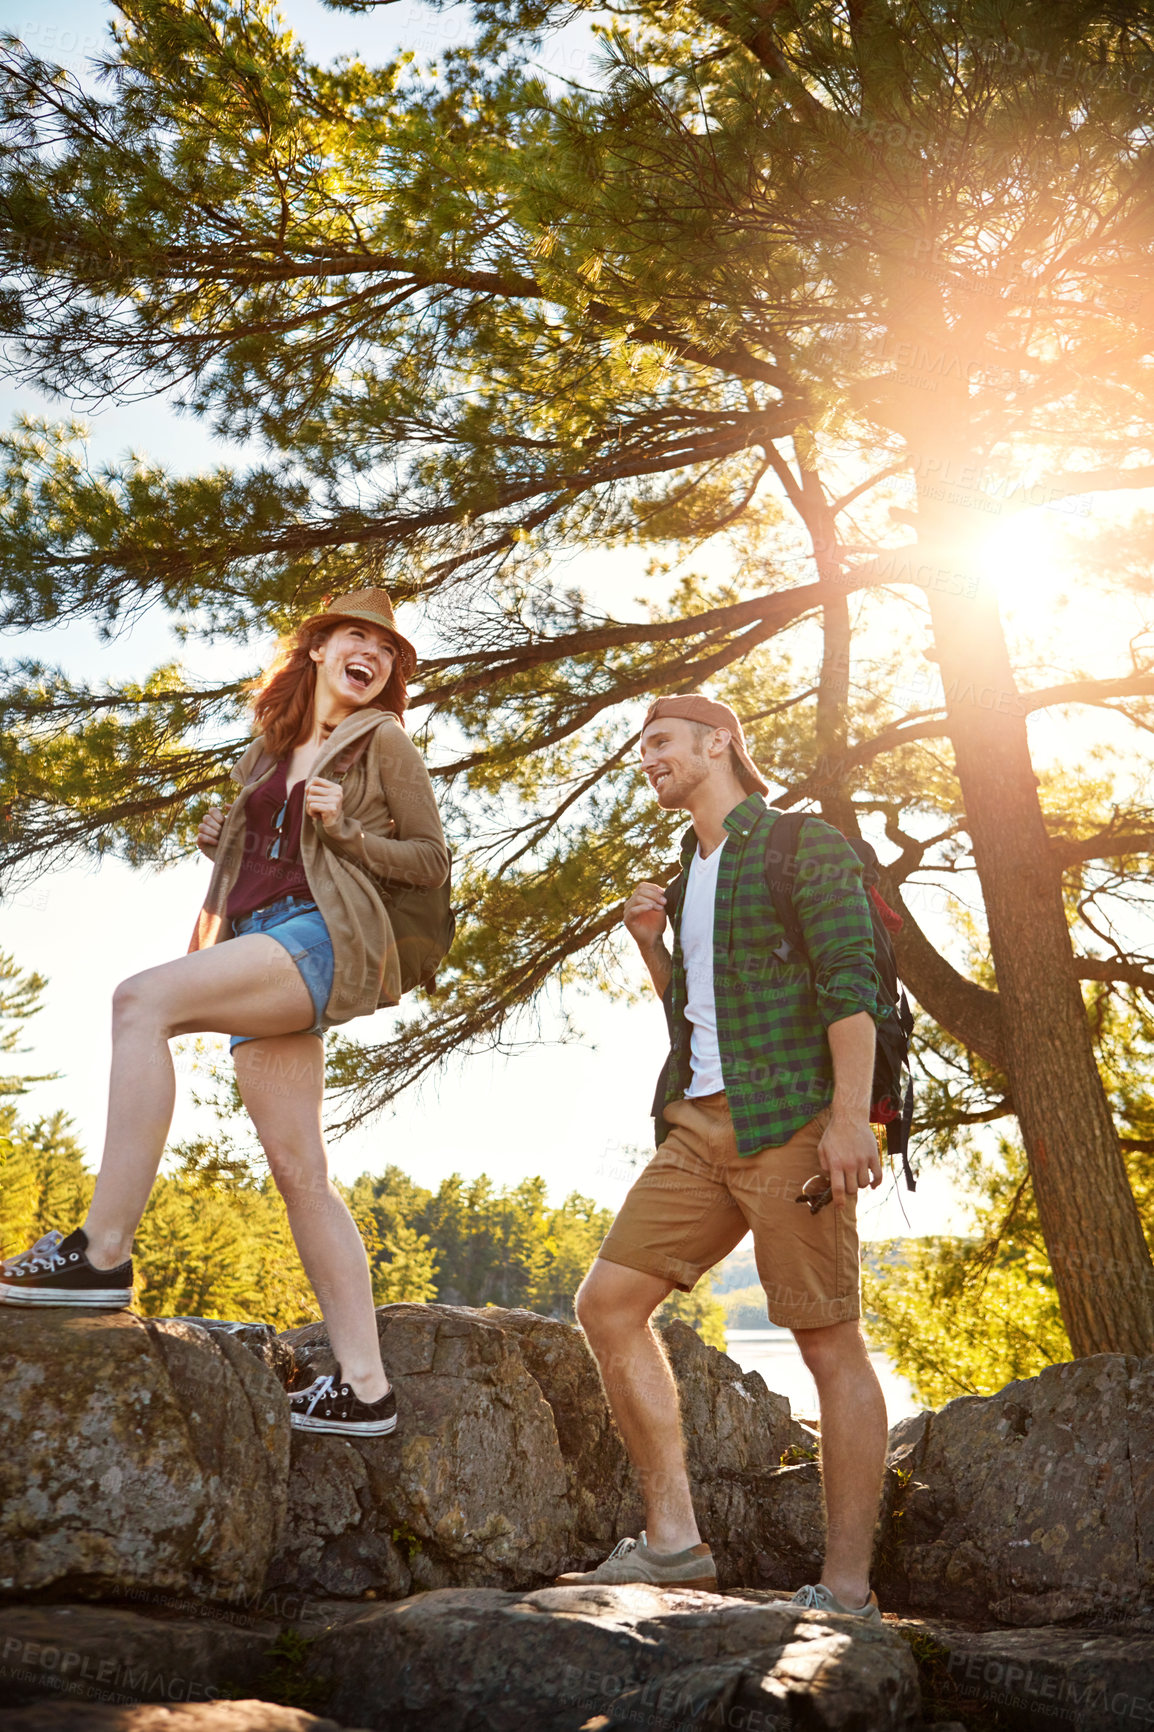 Buy stock photo Sunshine, hiking and couple walking with trees, nature and adventure holiday in outdoor park. Trekking, man and woman on sustainable travel vacation together in woods with smile, rocks and happy date